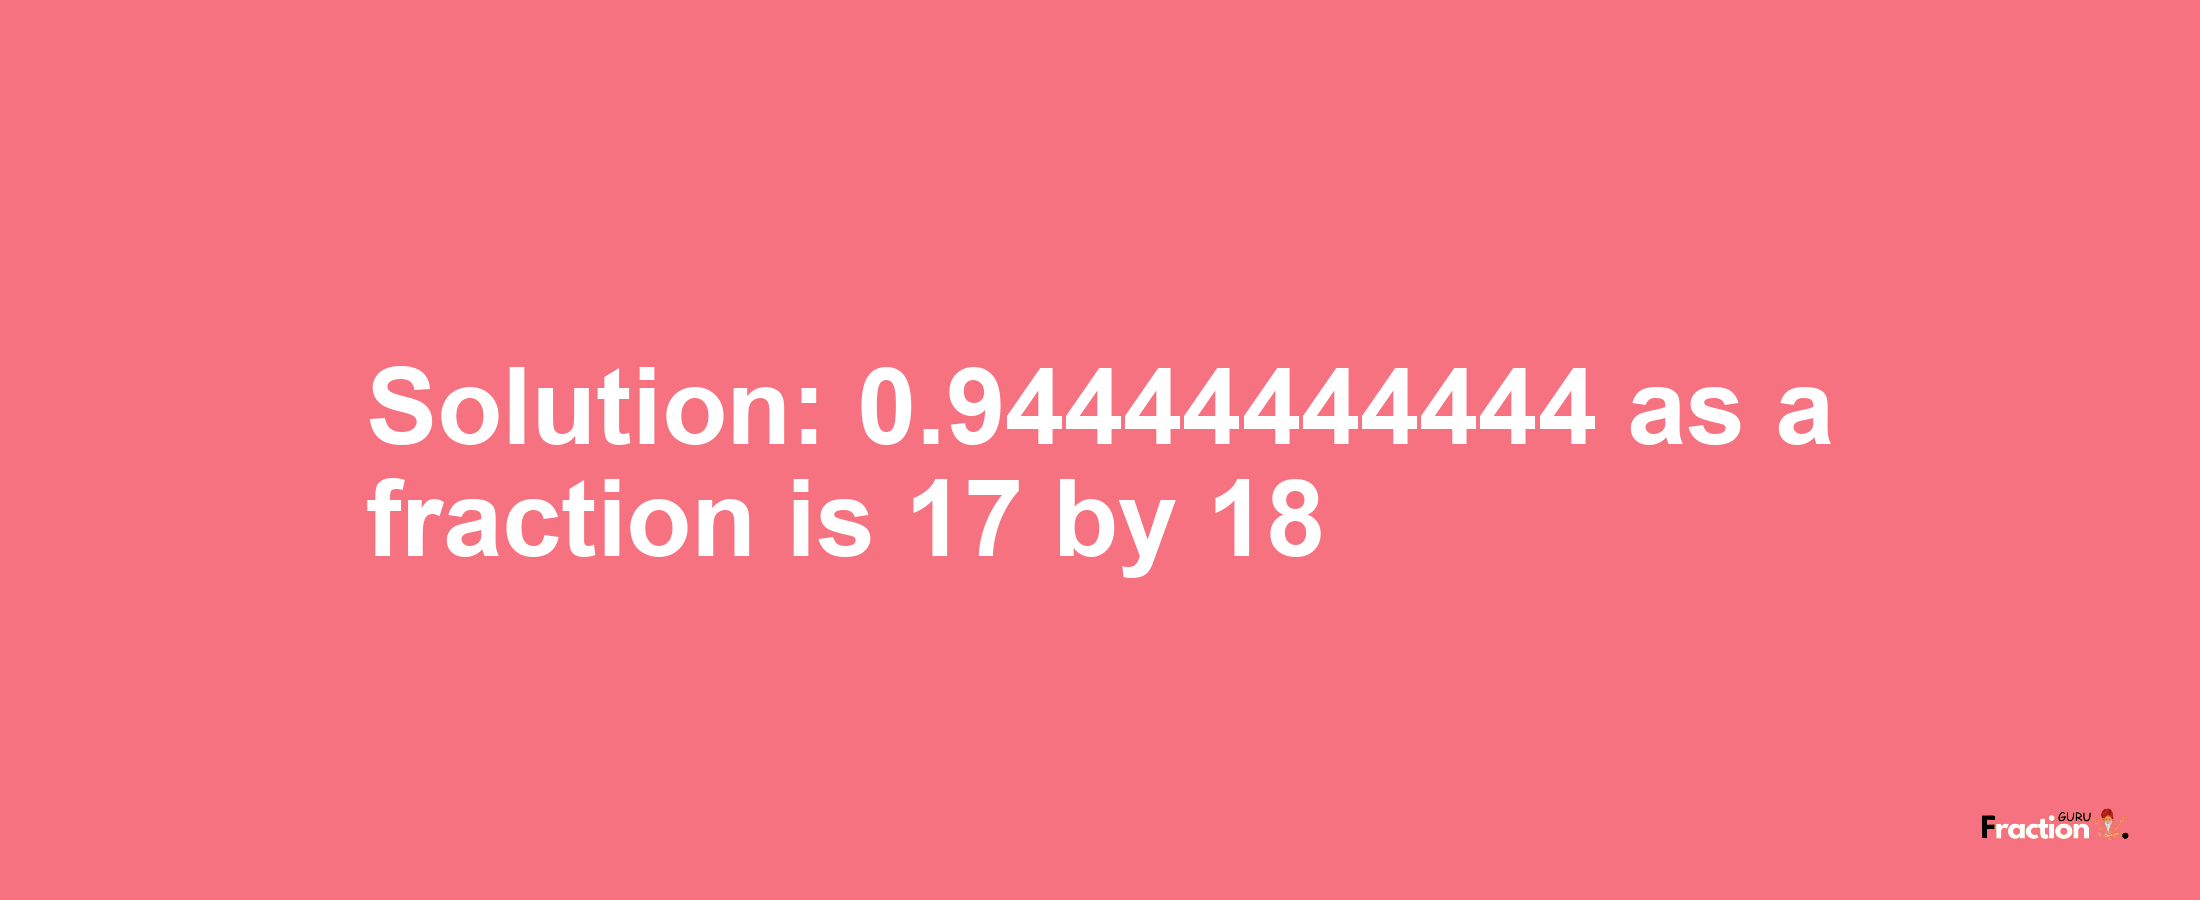 Solution:0.94444444444 as a fraction is 17/18